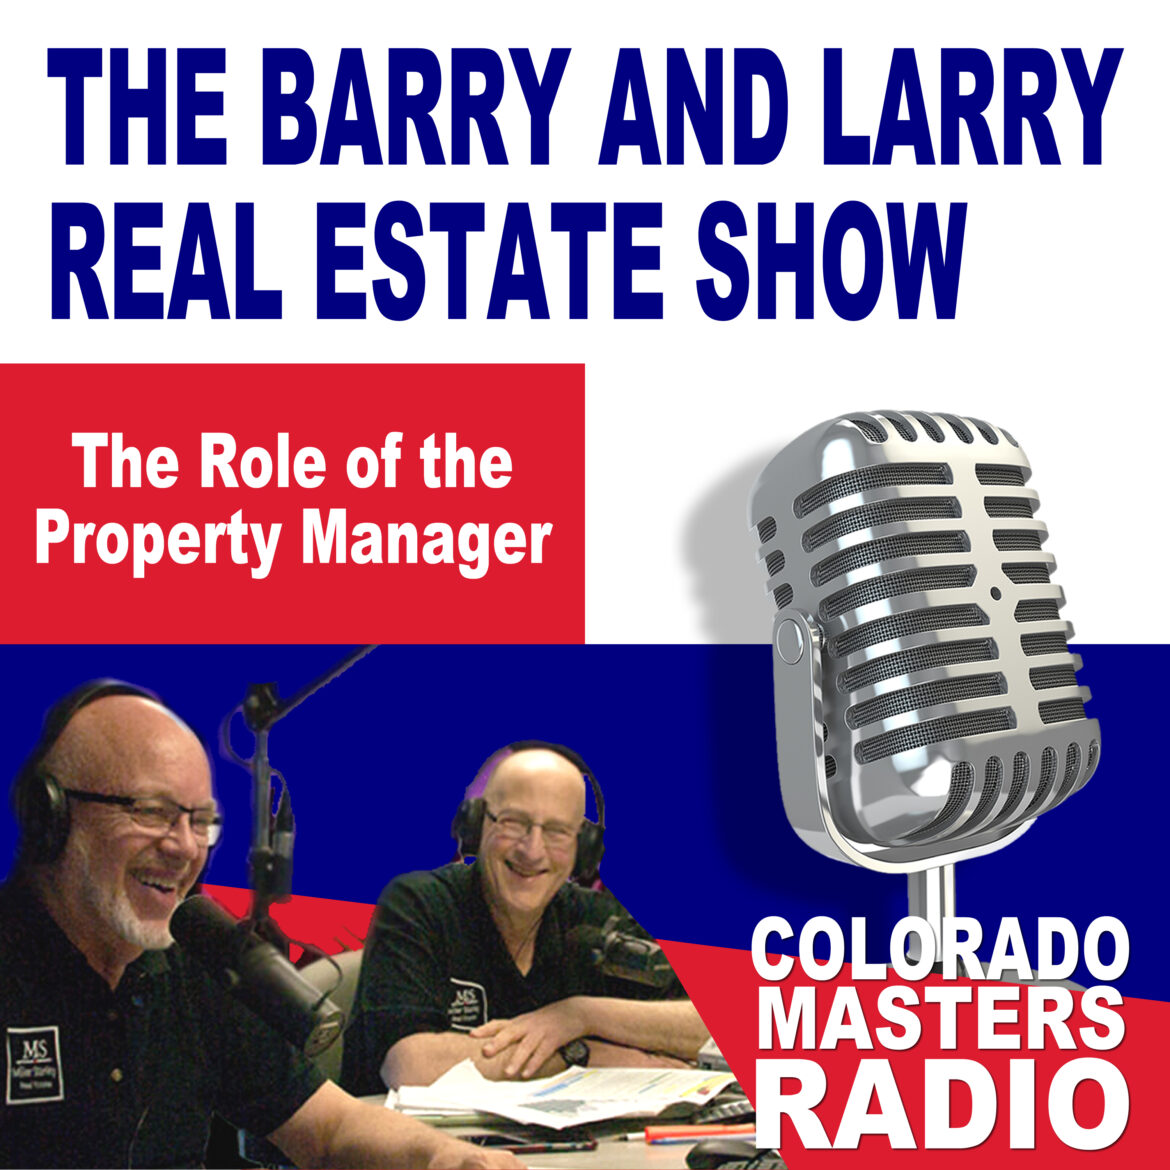 The Larry and Barry Real Estate Show - The Role of the Property Manager